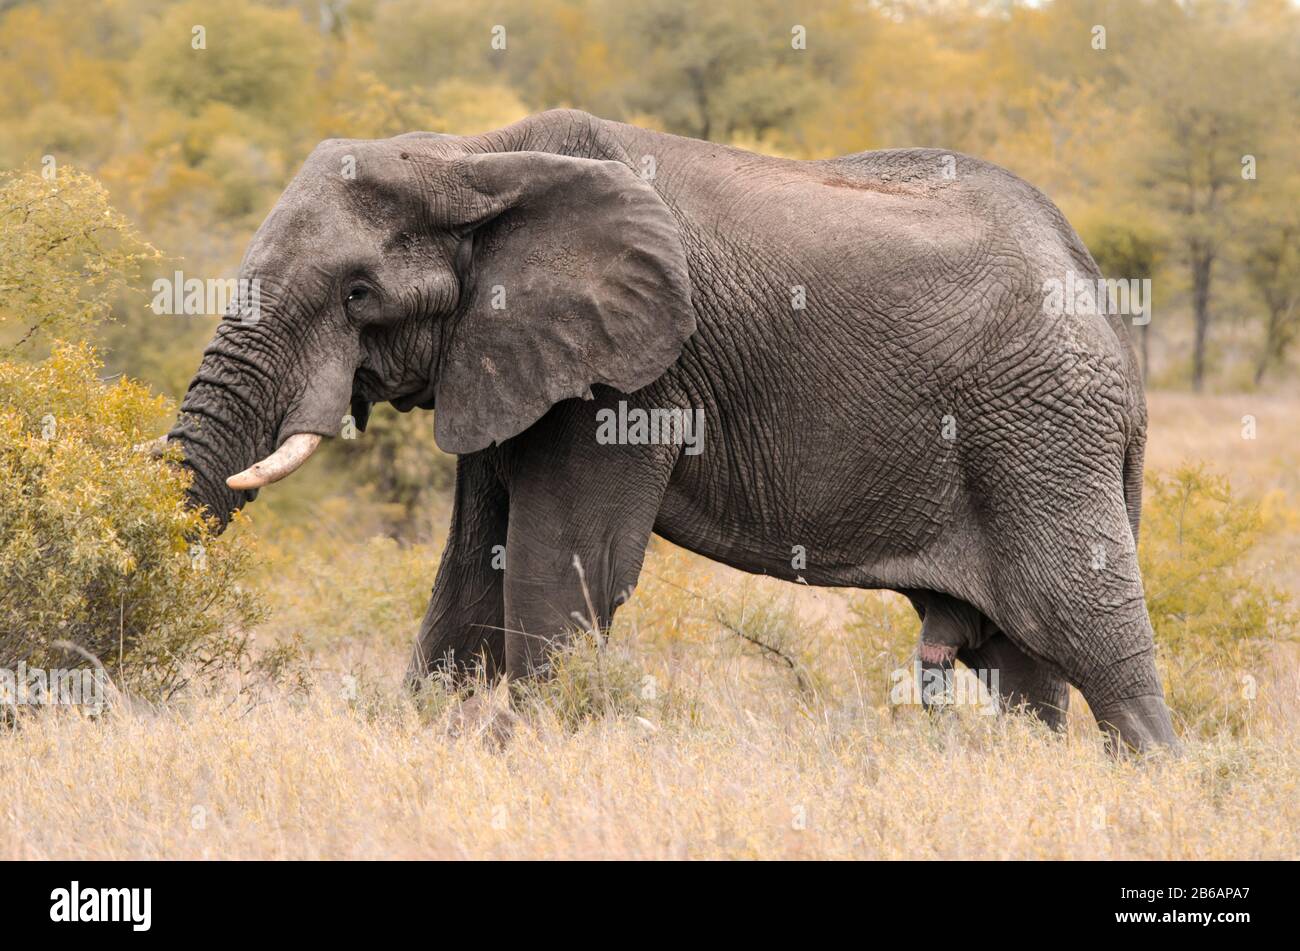 A male African elephant (Loxodonta africana) grazing amidst the tall grass and shrubs in Kruger National Park, South Africa Stock Photo